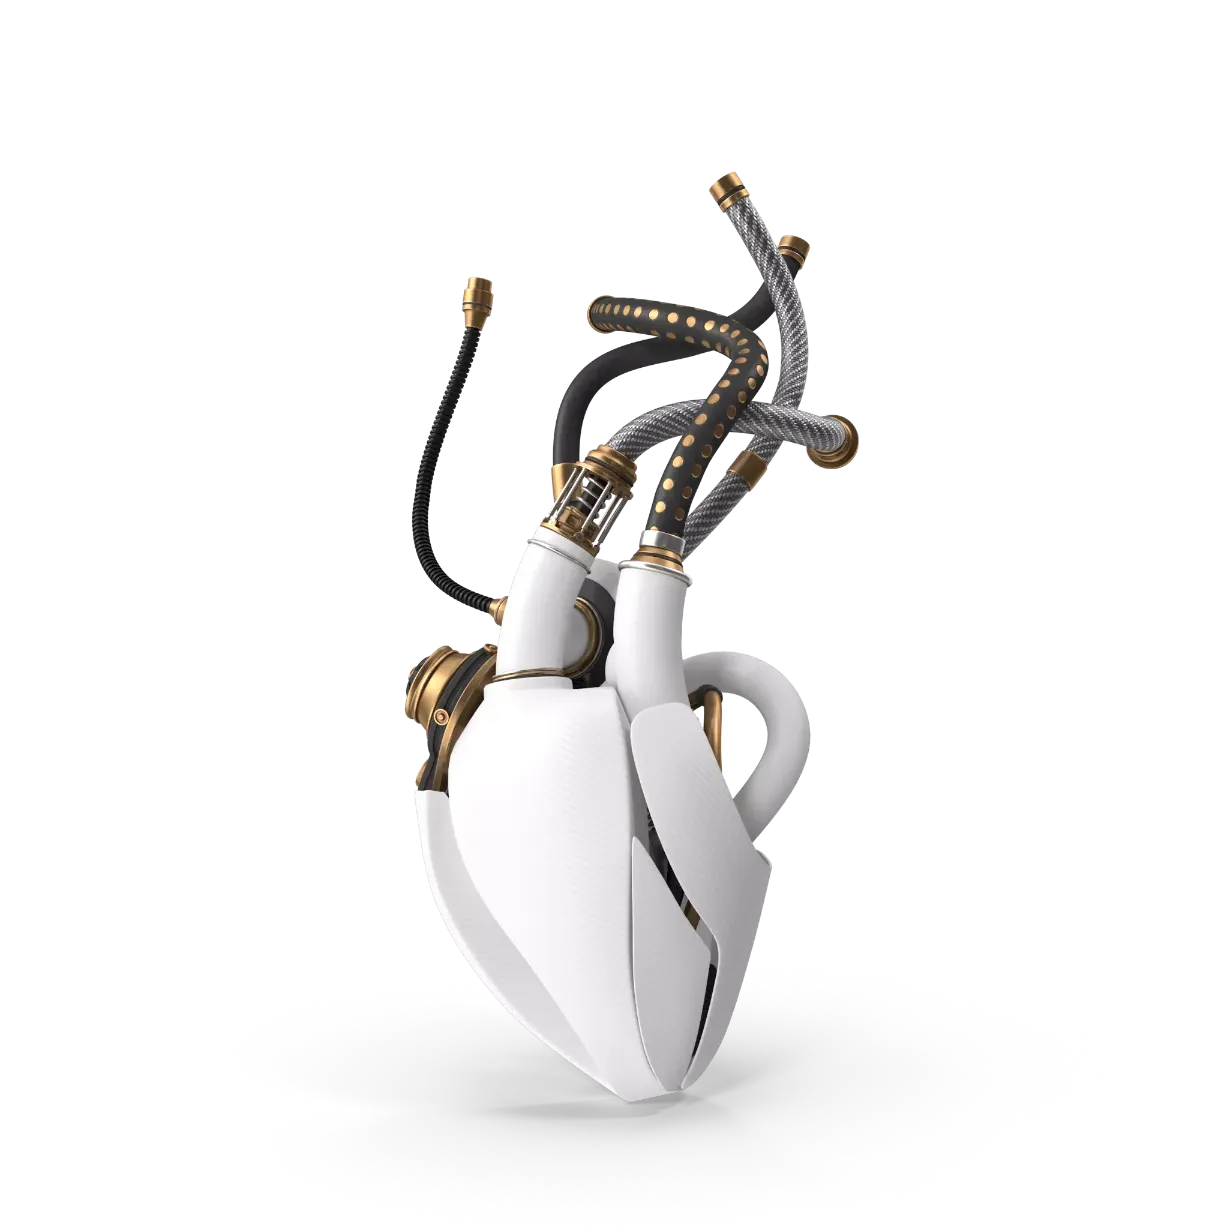 A bionic heart as the Digitalization quickcard header image